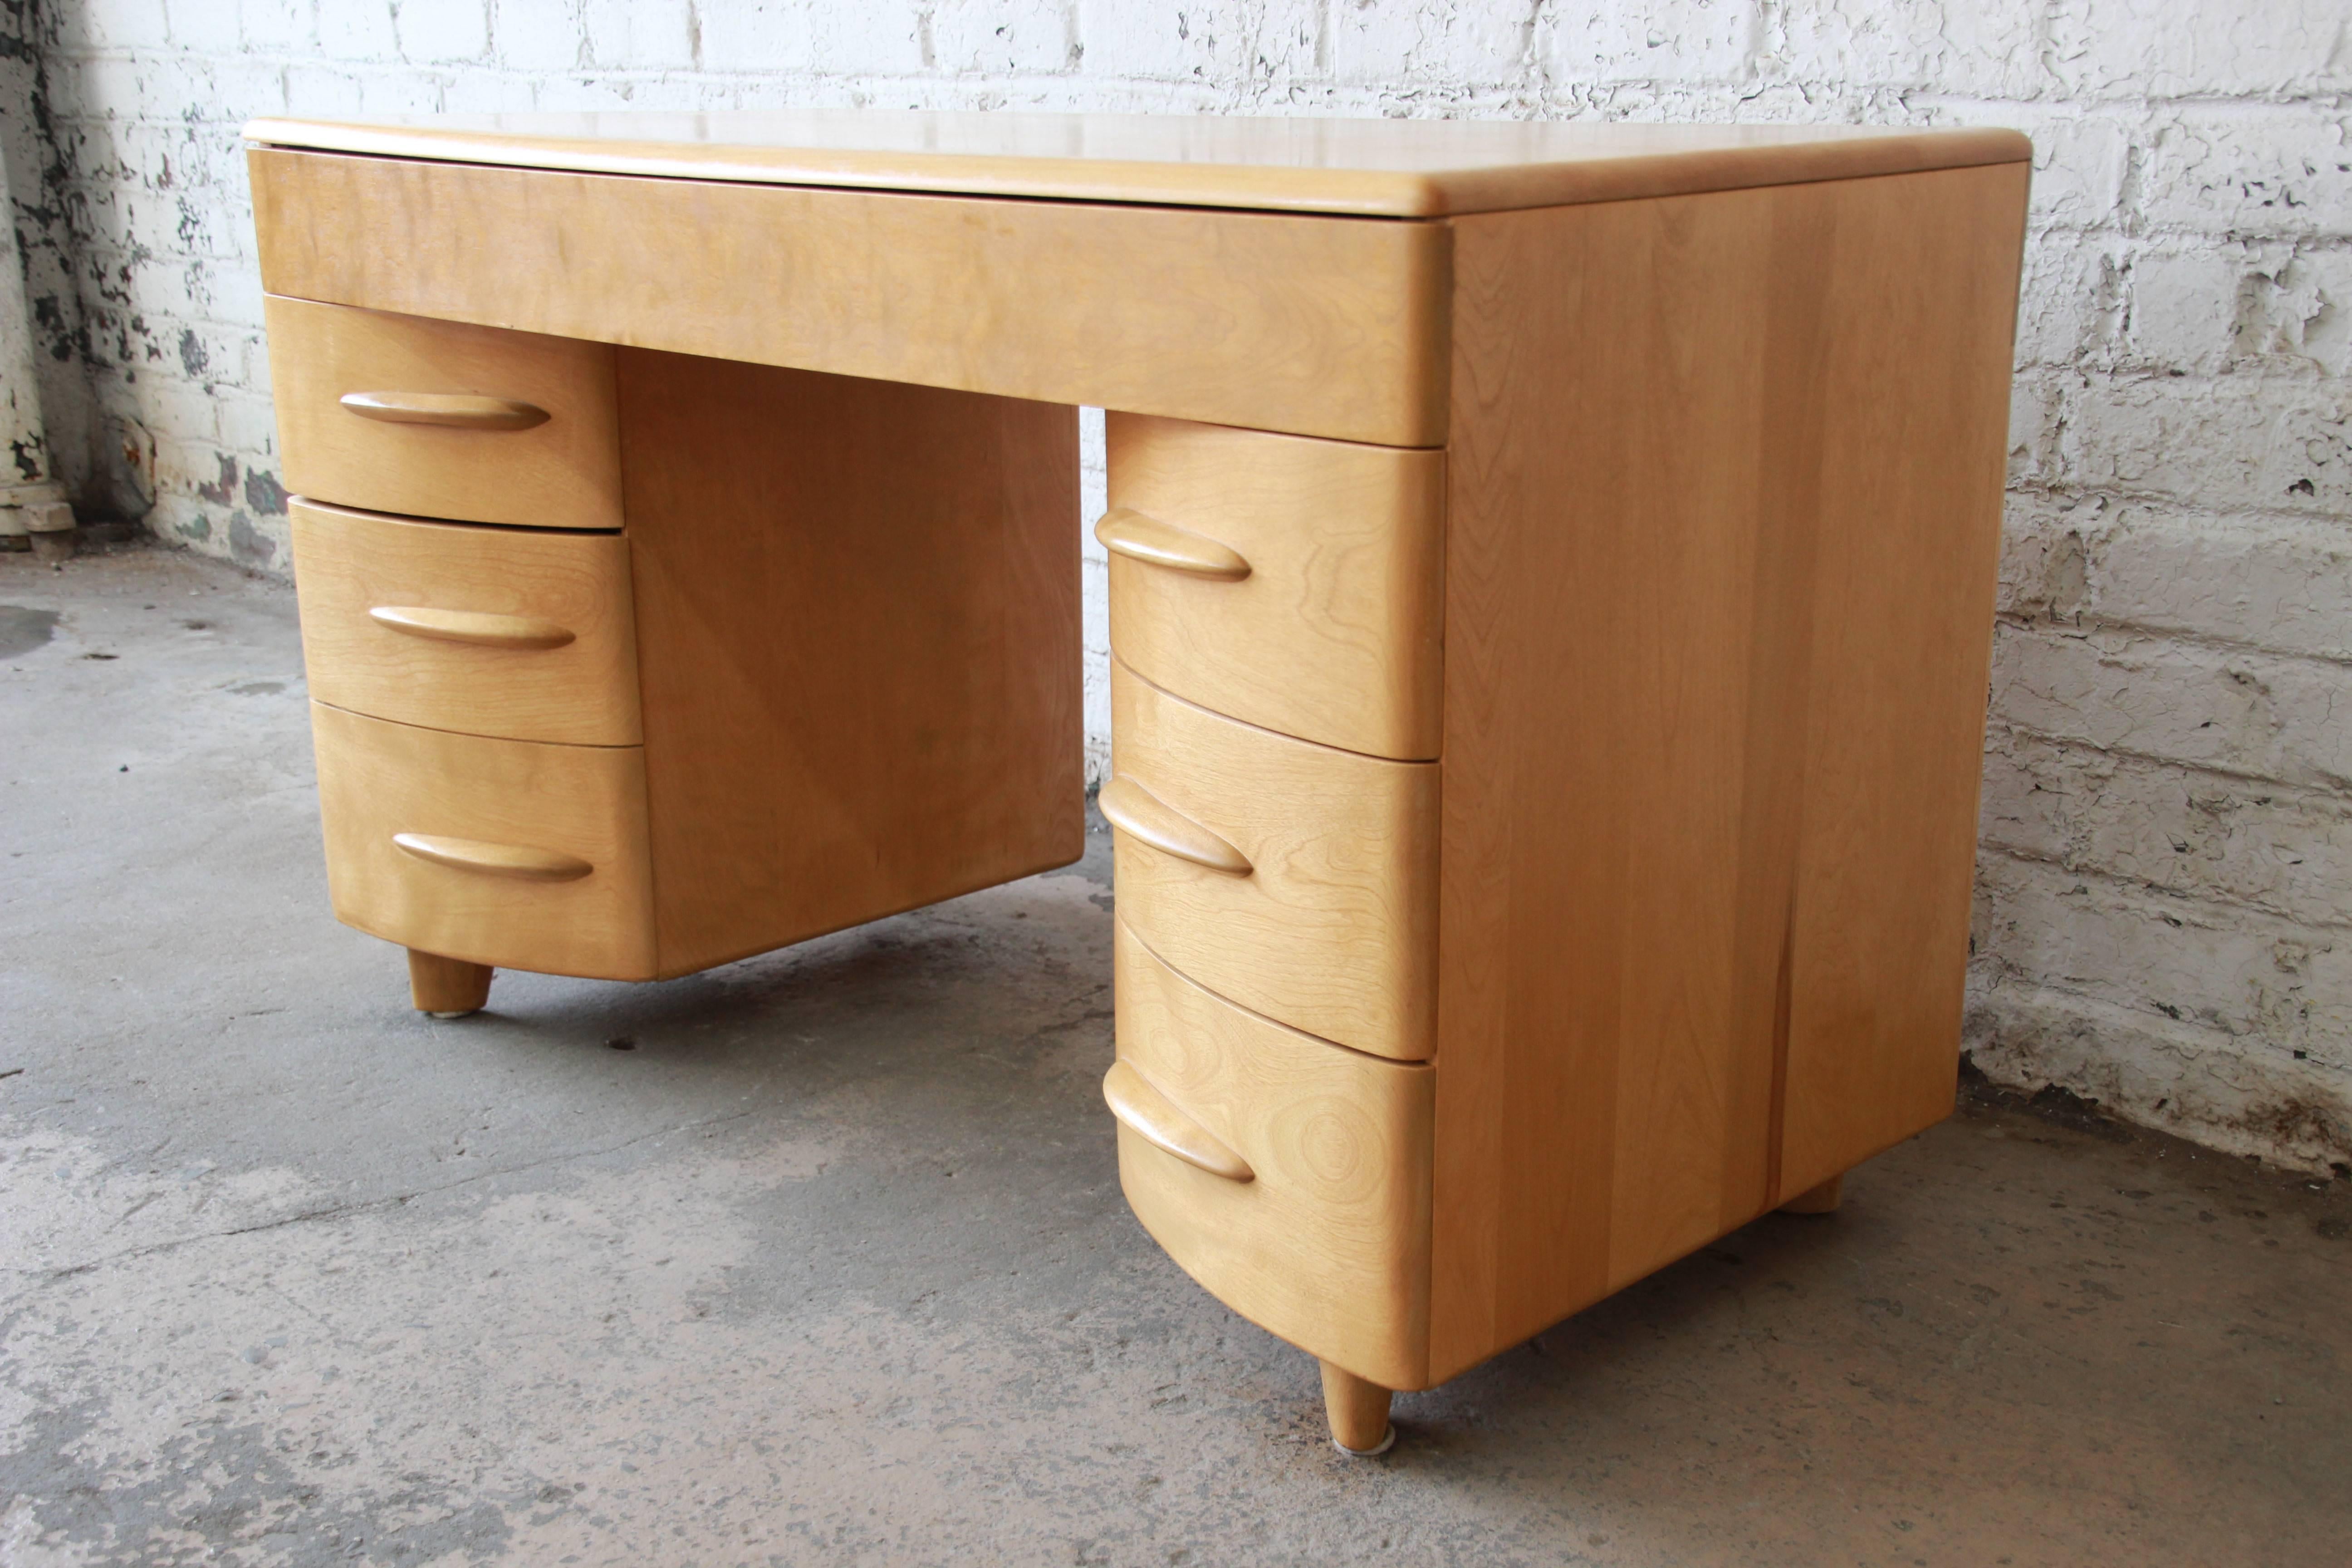 An exceptional 1950s Mid-Century Modern desk by Heywood Wakefield. The desk features solid maple construction, with beautiful wood grain and sculpted drawer pulls. It offers ample room for storage, with six drawers. The top middle drawer is divided